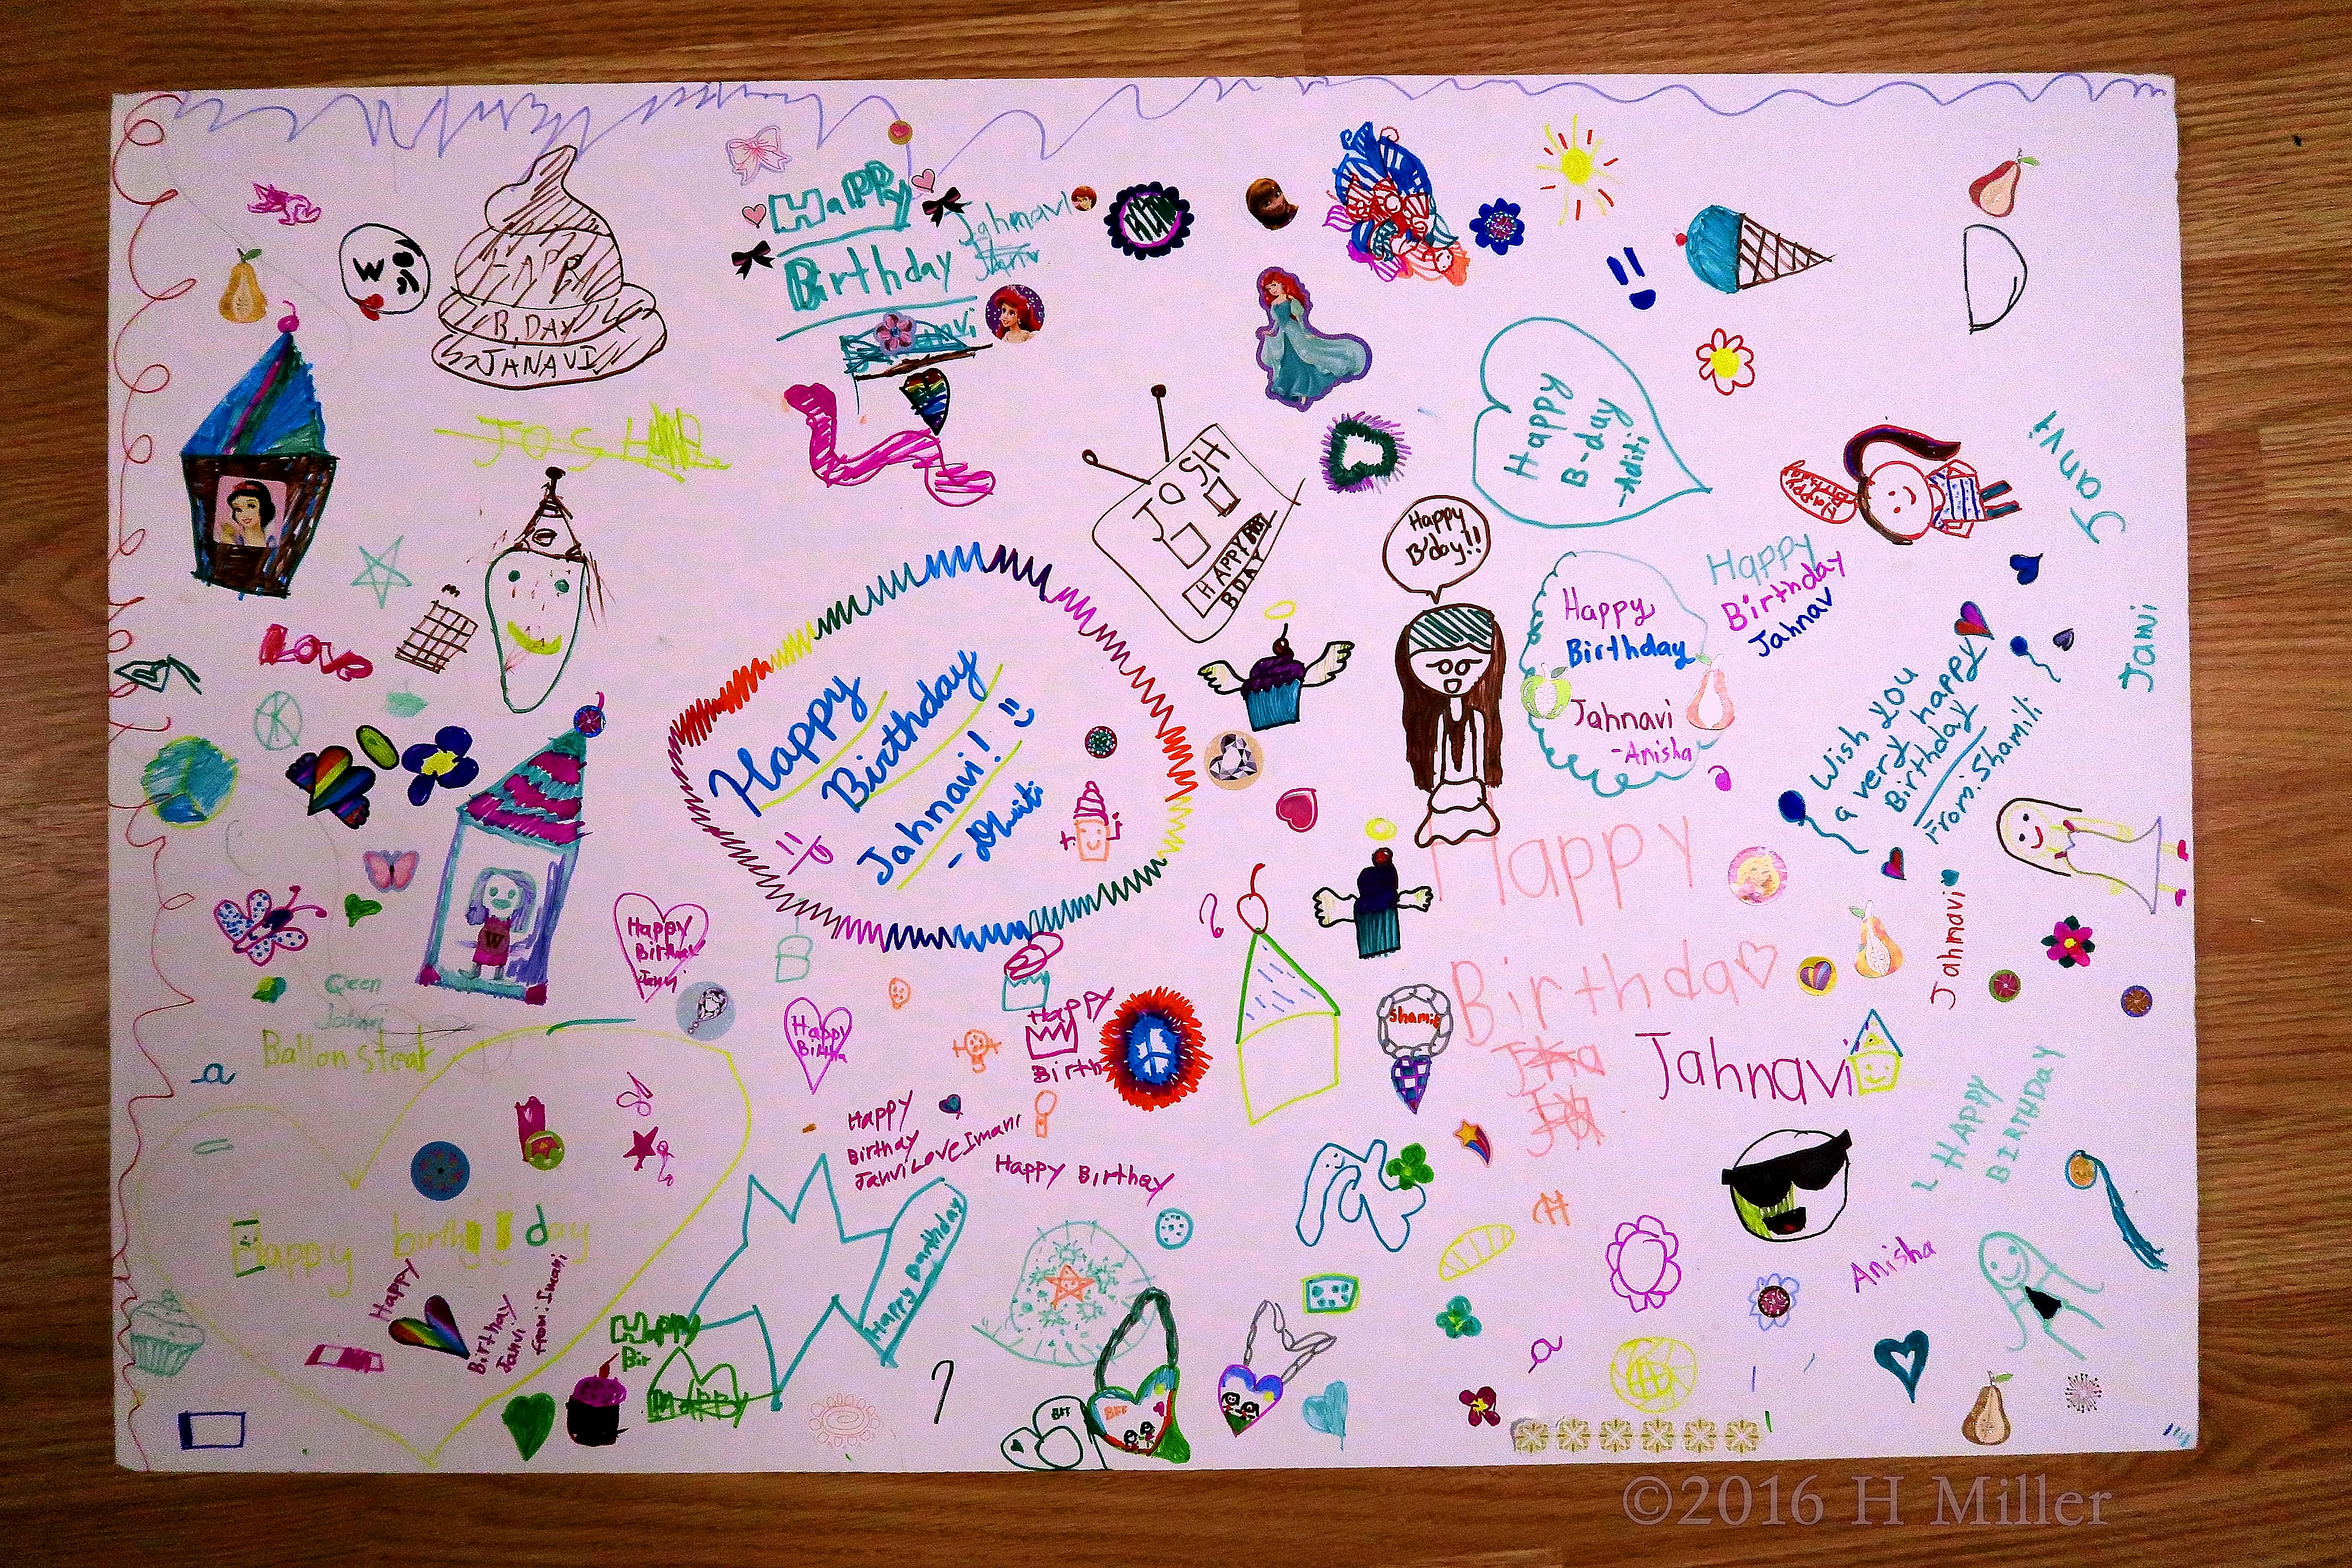 Colorful Spa Birthday Card Designed By All Of Jahnavi's Friends.